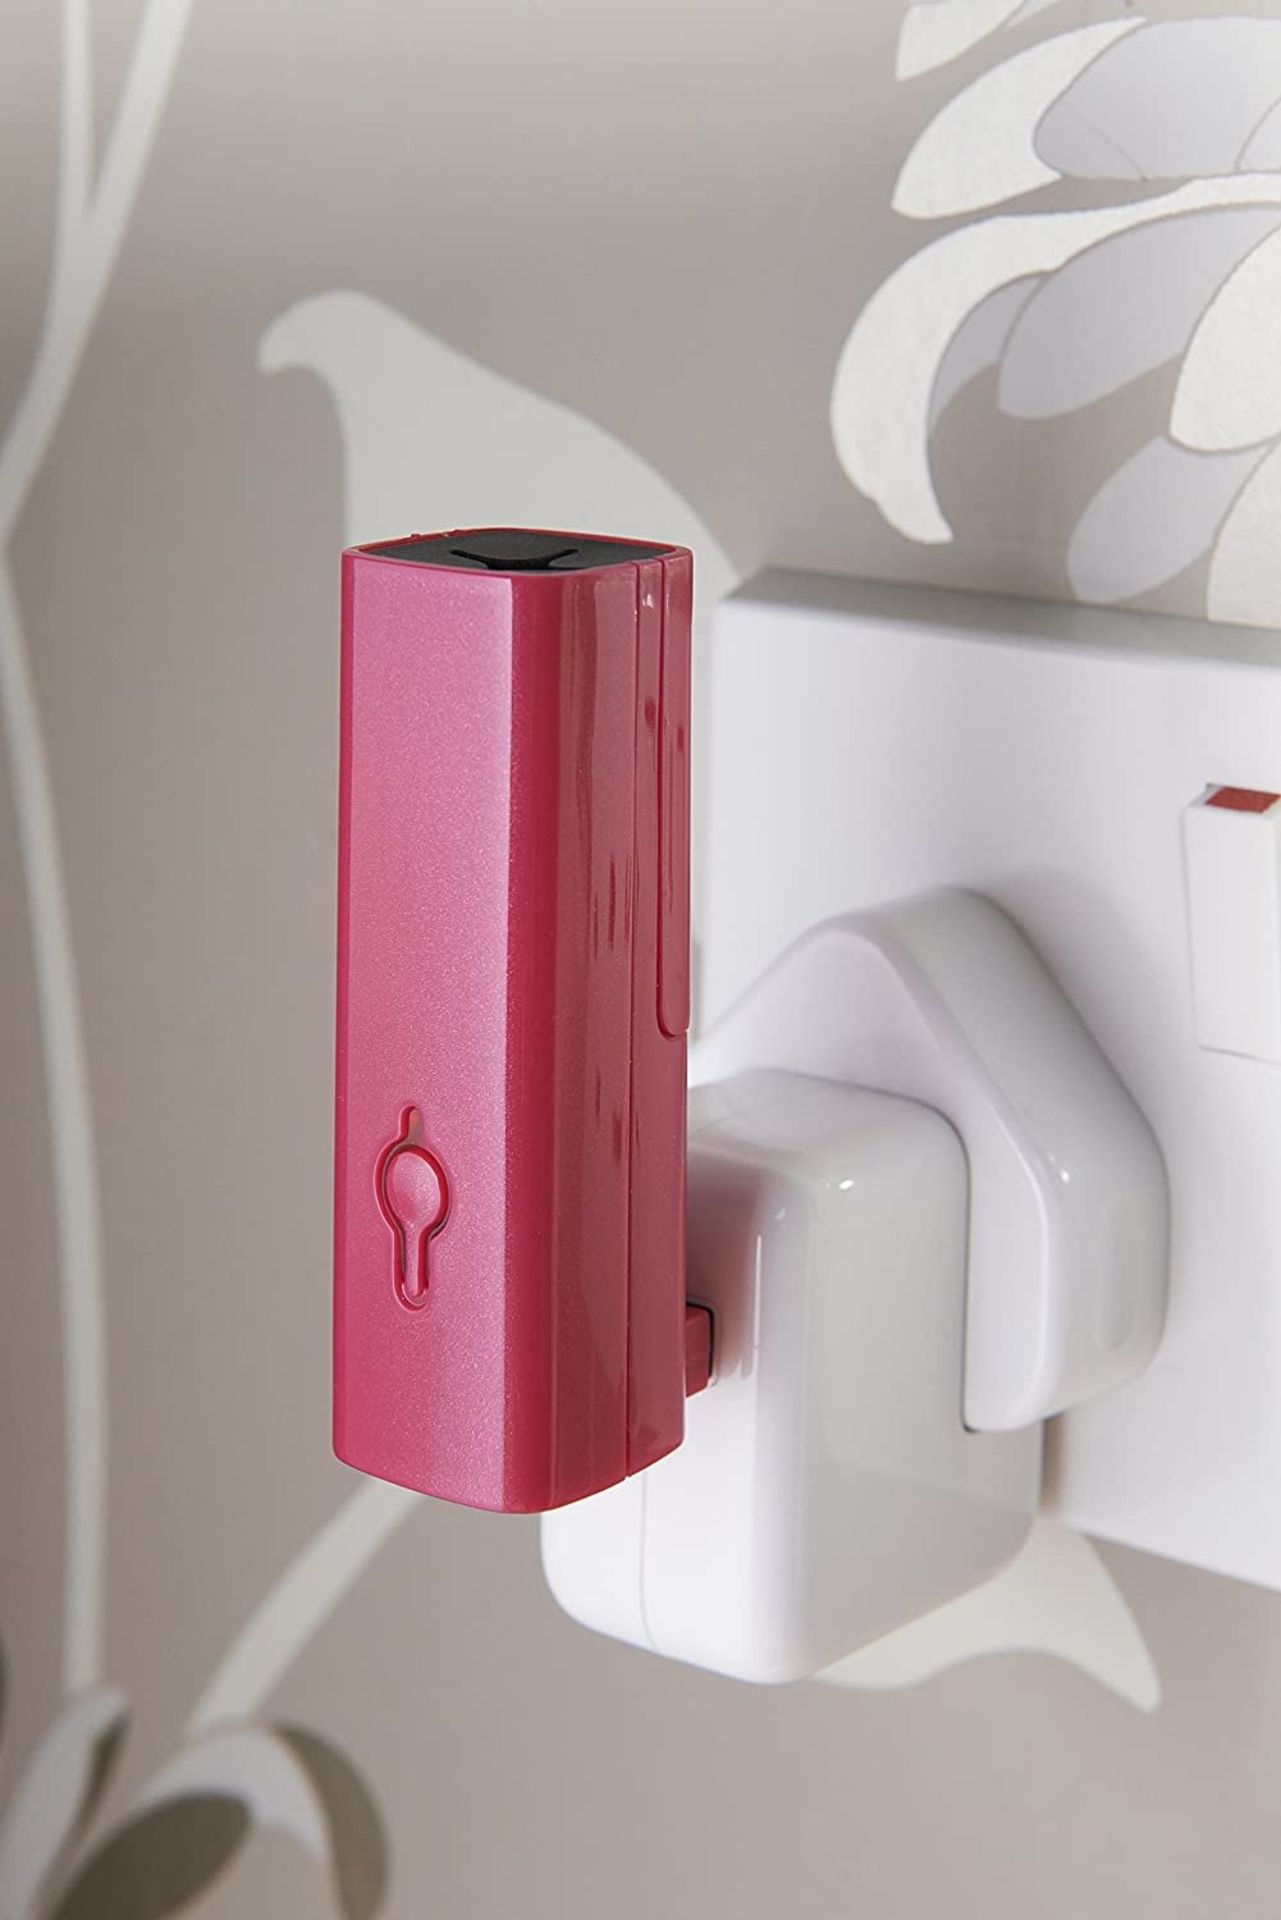 x24 USB Diffuser In Rose Pink - Image 2 of 4